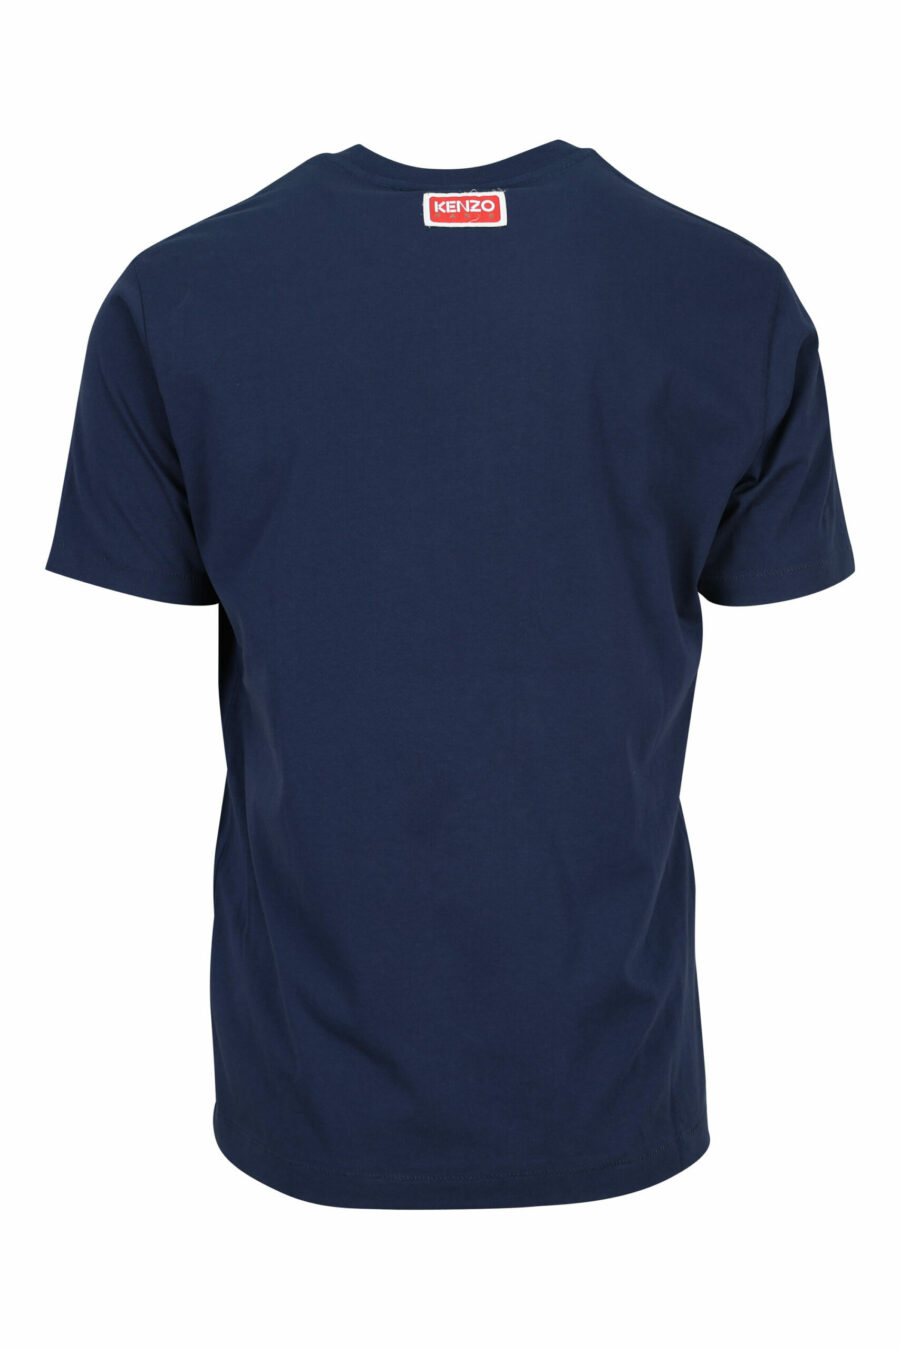 Blue T-shirt with "flower" logo - 3612230465732 1 scaled